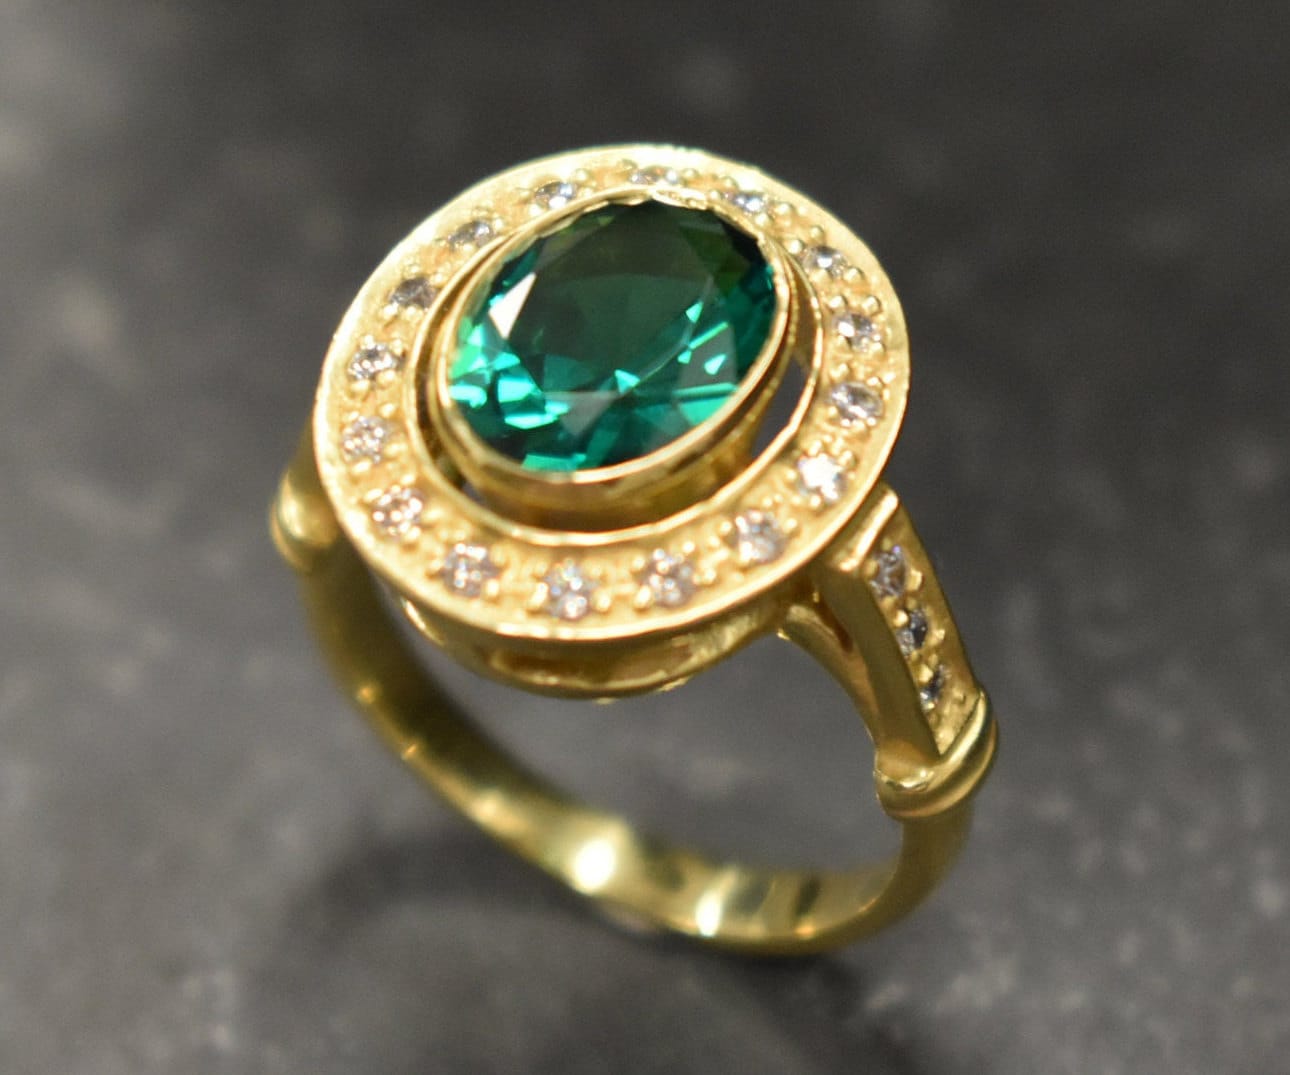 Gold Emerald Ring, Gold Antique Ring, Gold Vintage Ring, Antique Emerald Ring, Antique Rings, Sterling Silver Ring, Created Emerald Ring